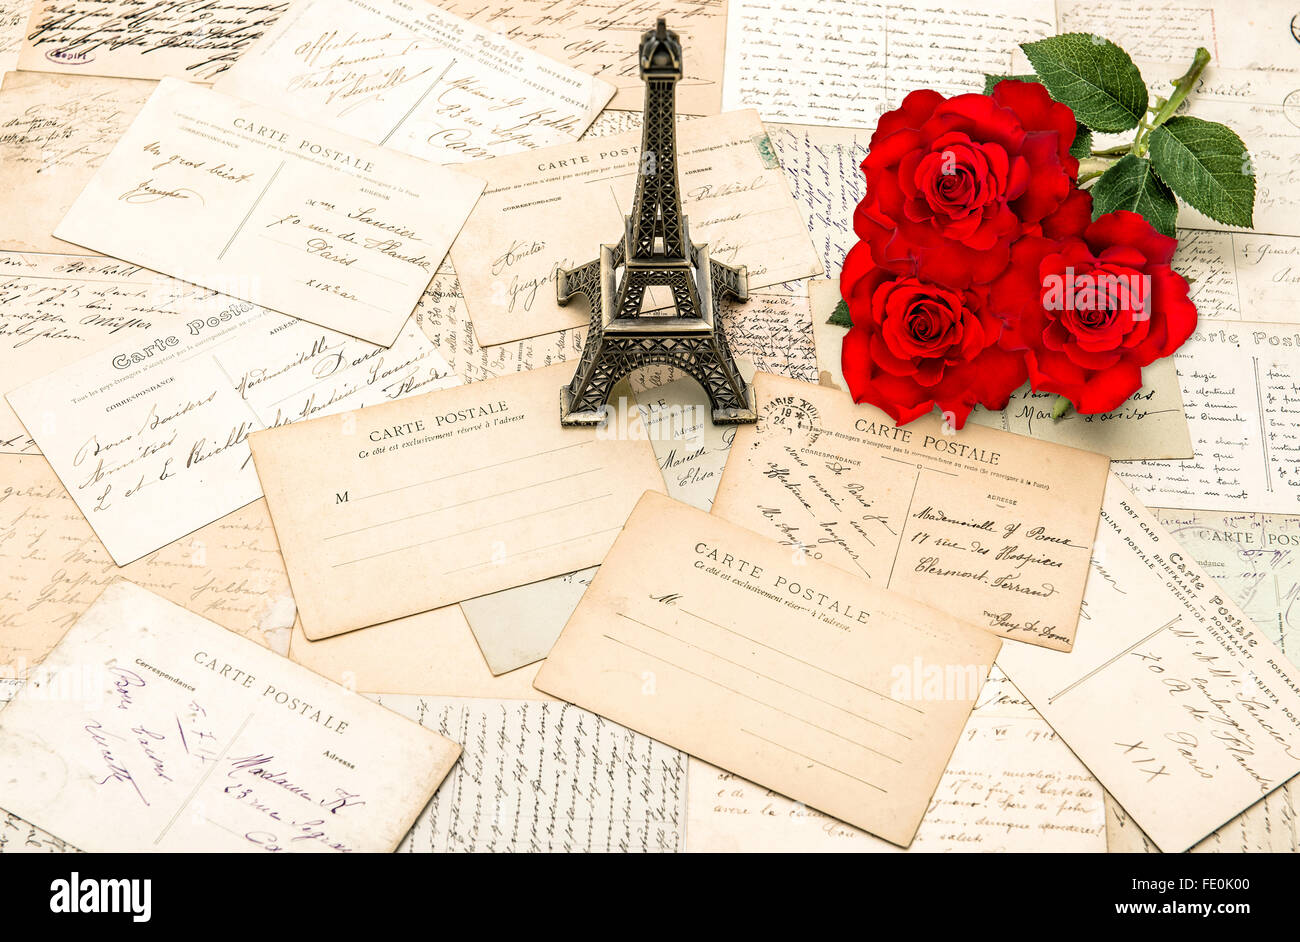 Red roses, old letters and souvenir Eiffel Tower from Paris. Nostalgic holidays background Stock Photo